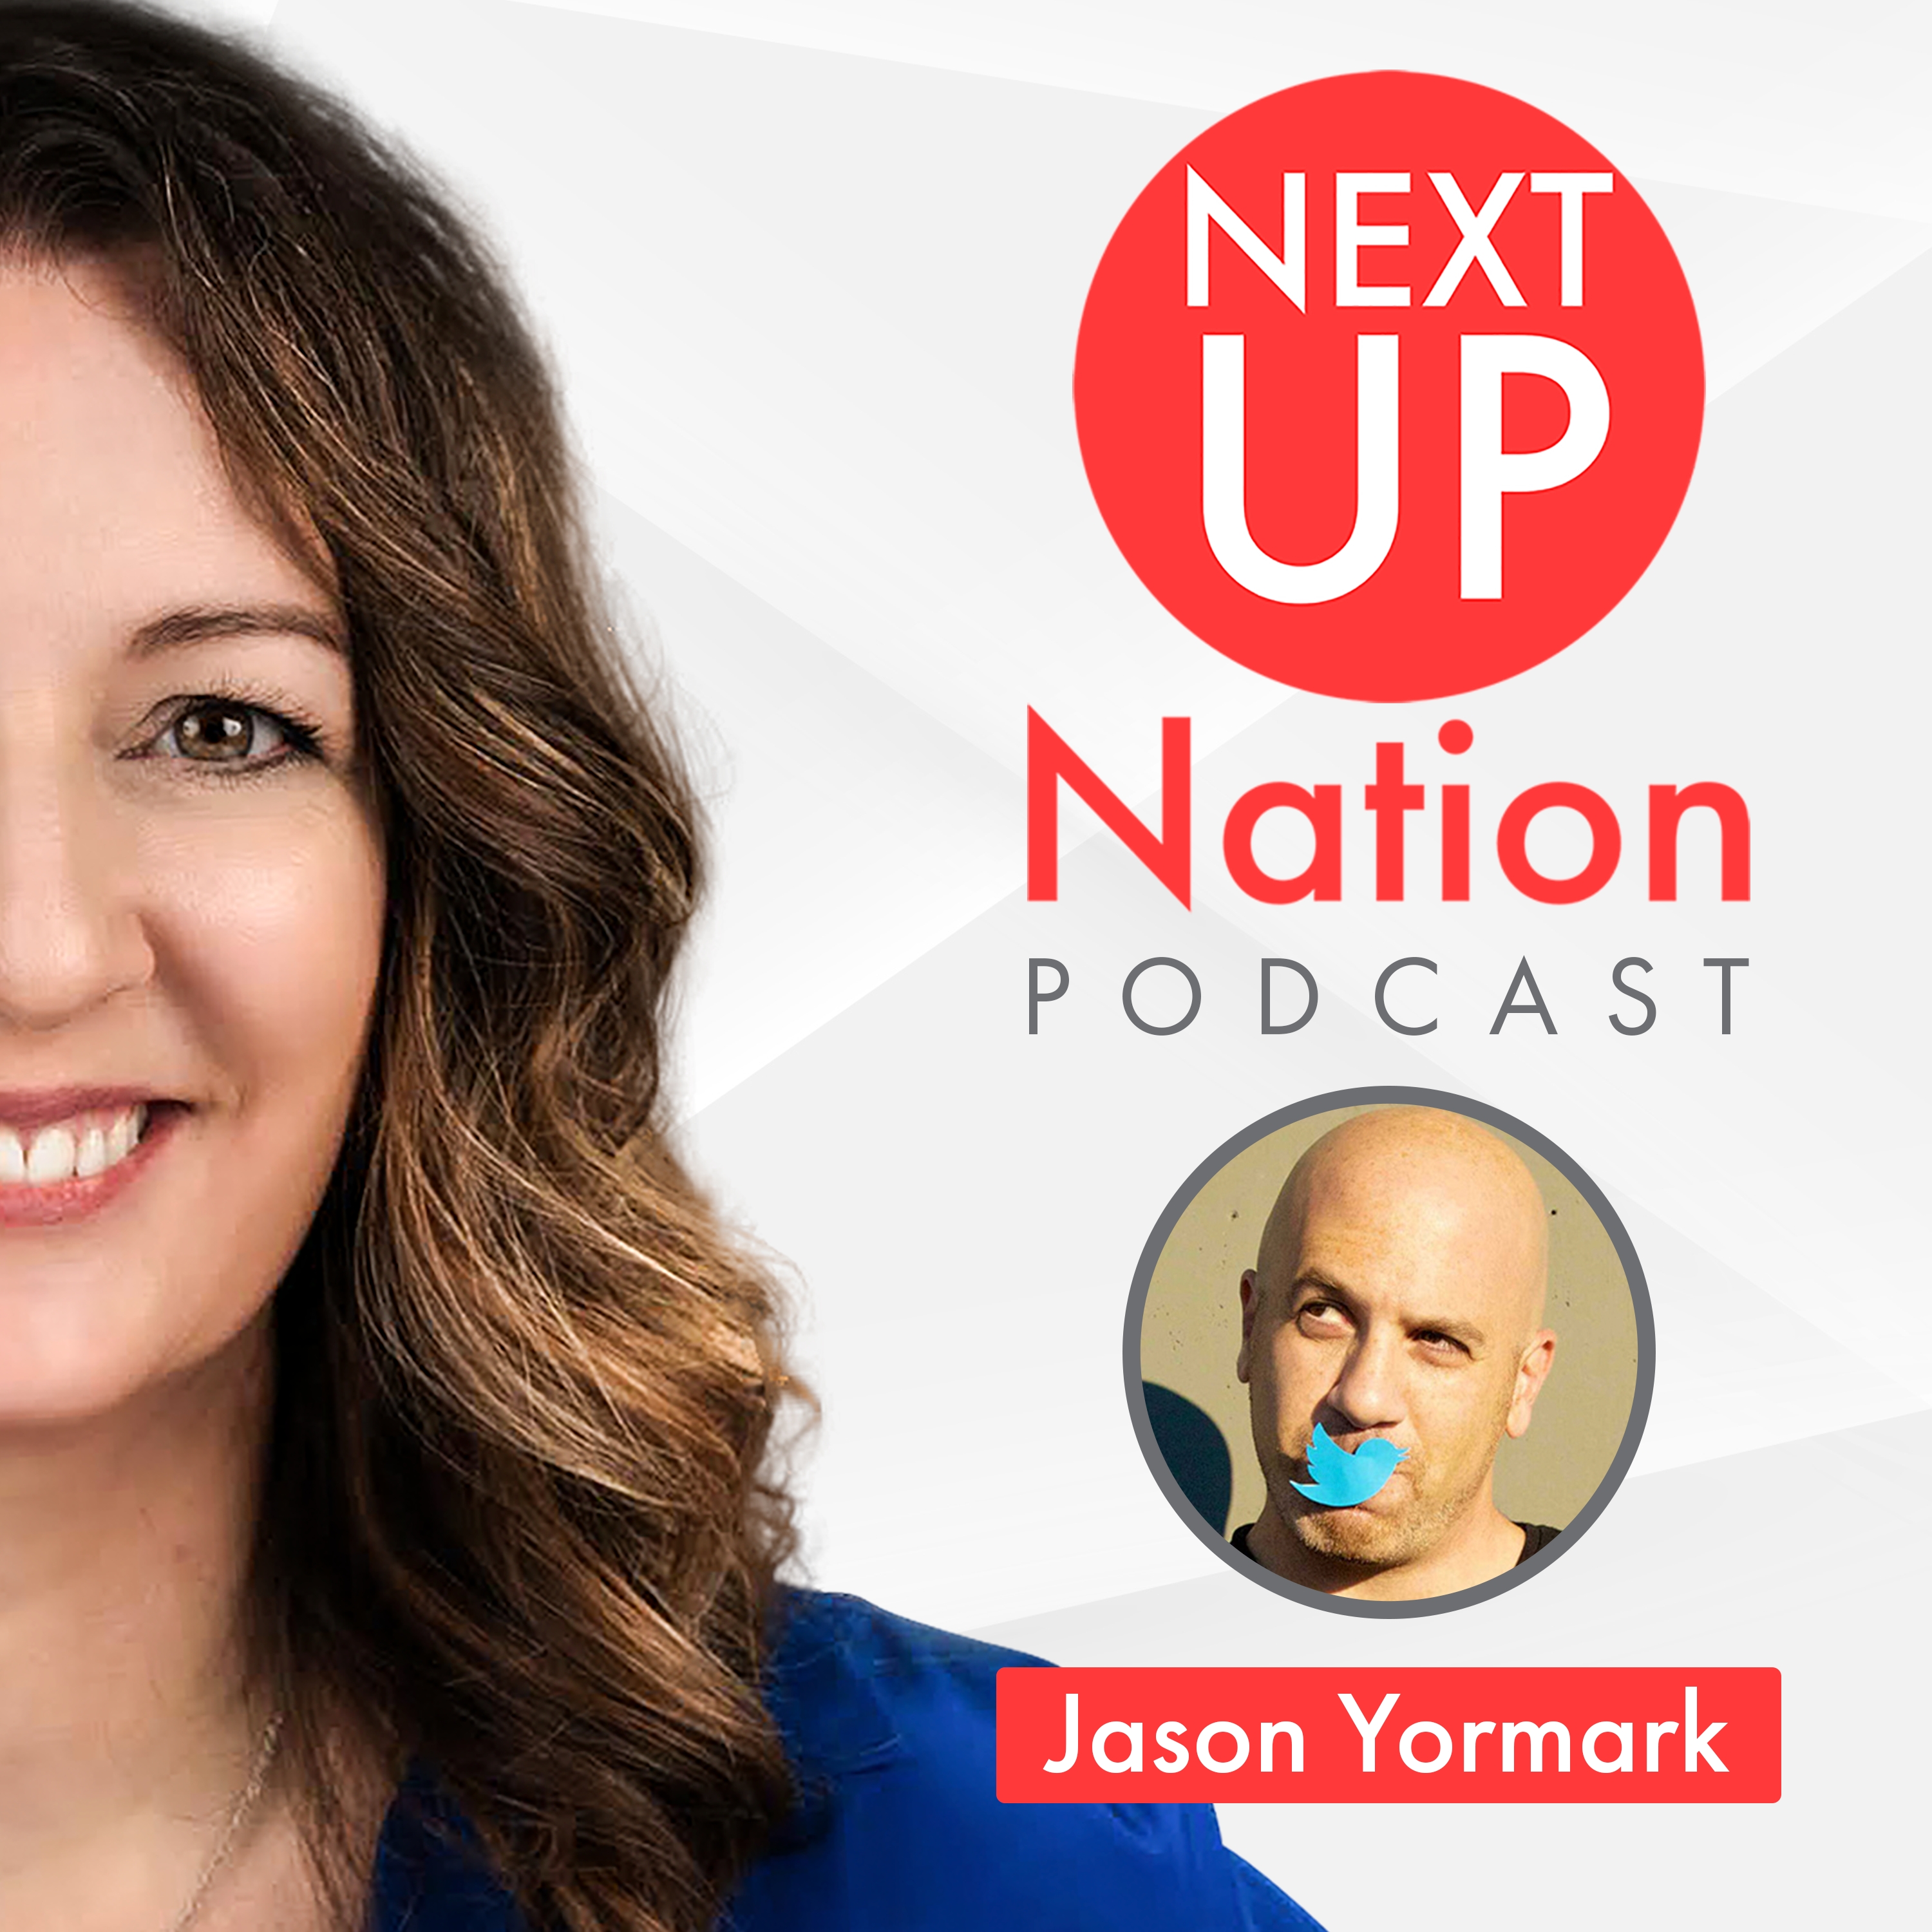 Why You Should Niche Your Podcast for Massive Appeal - Jason Yormark